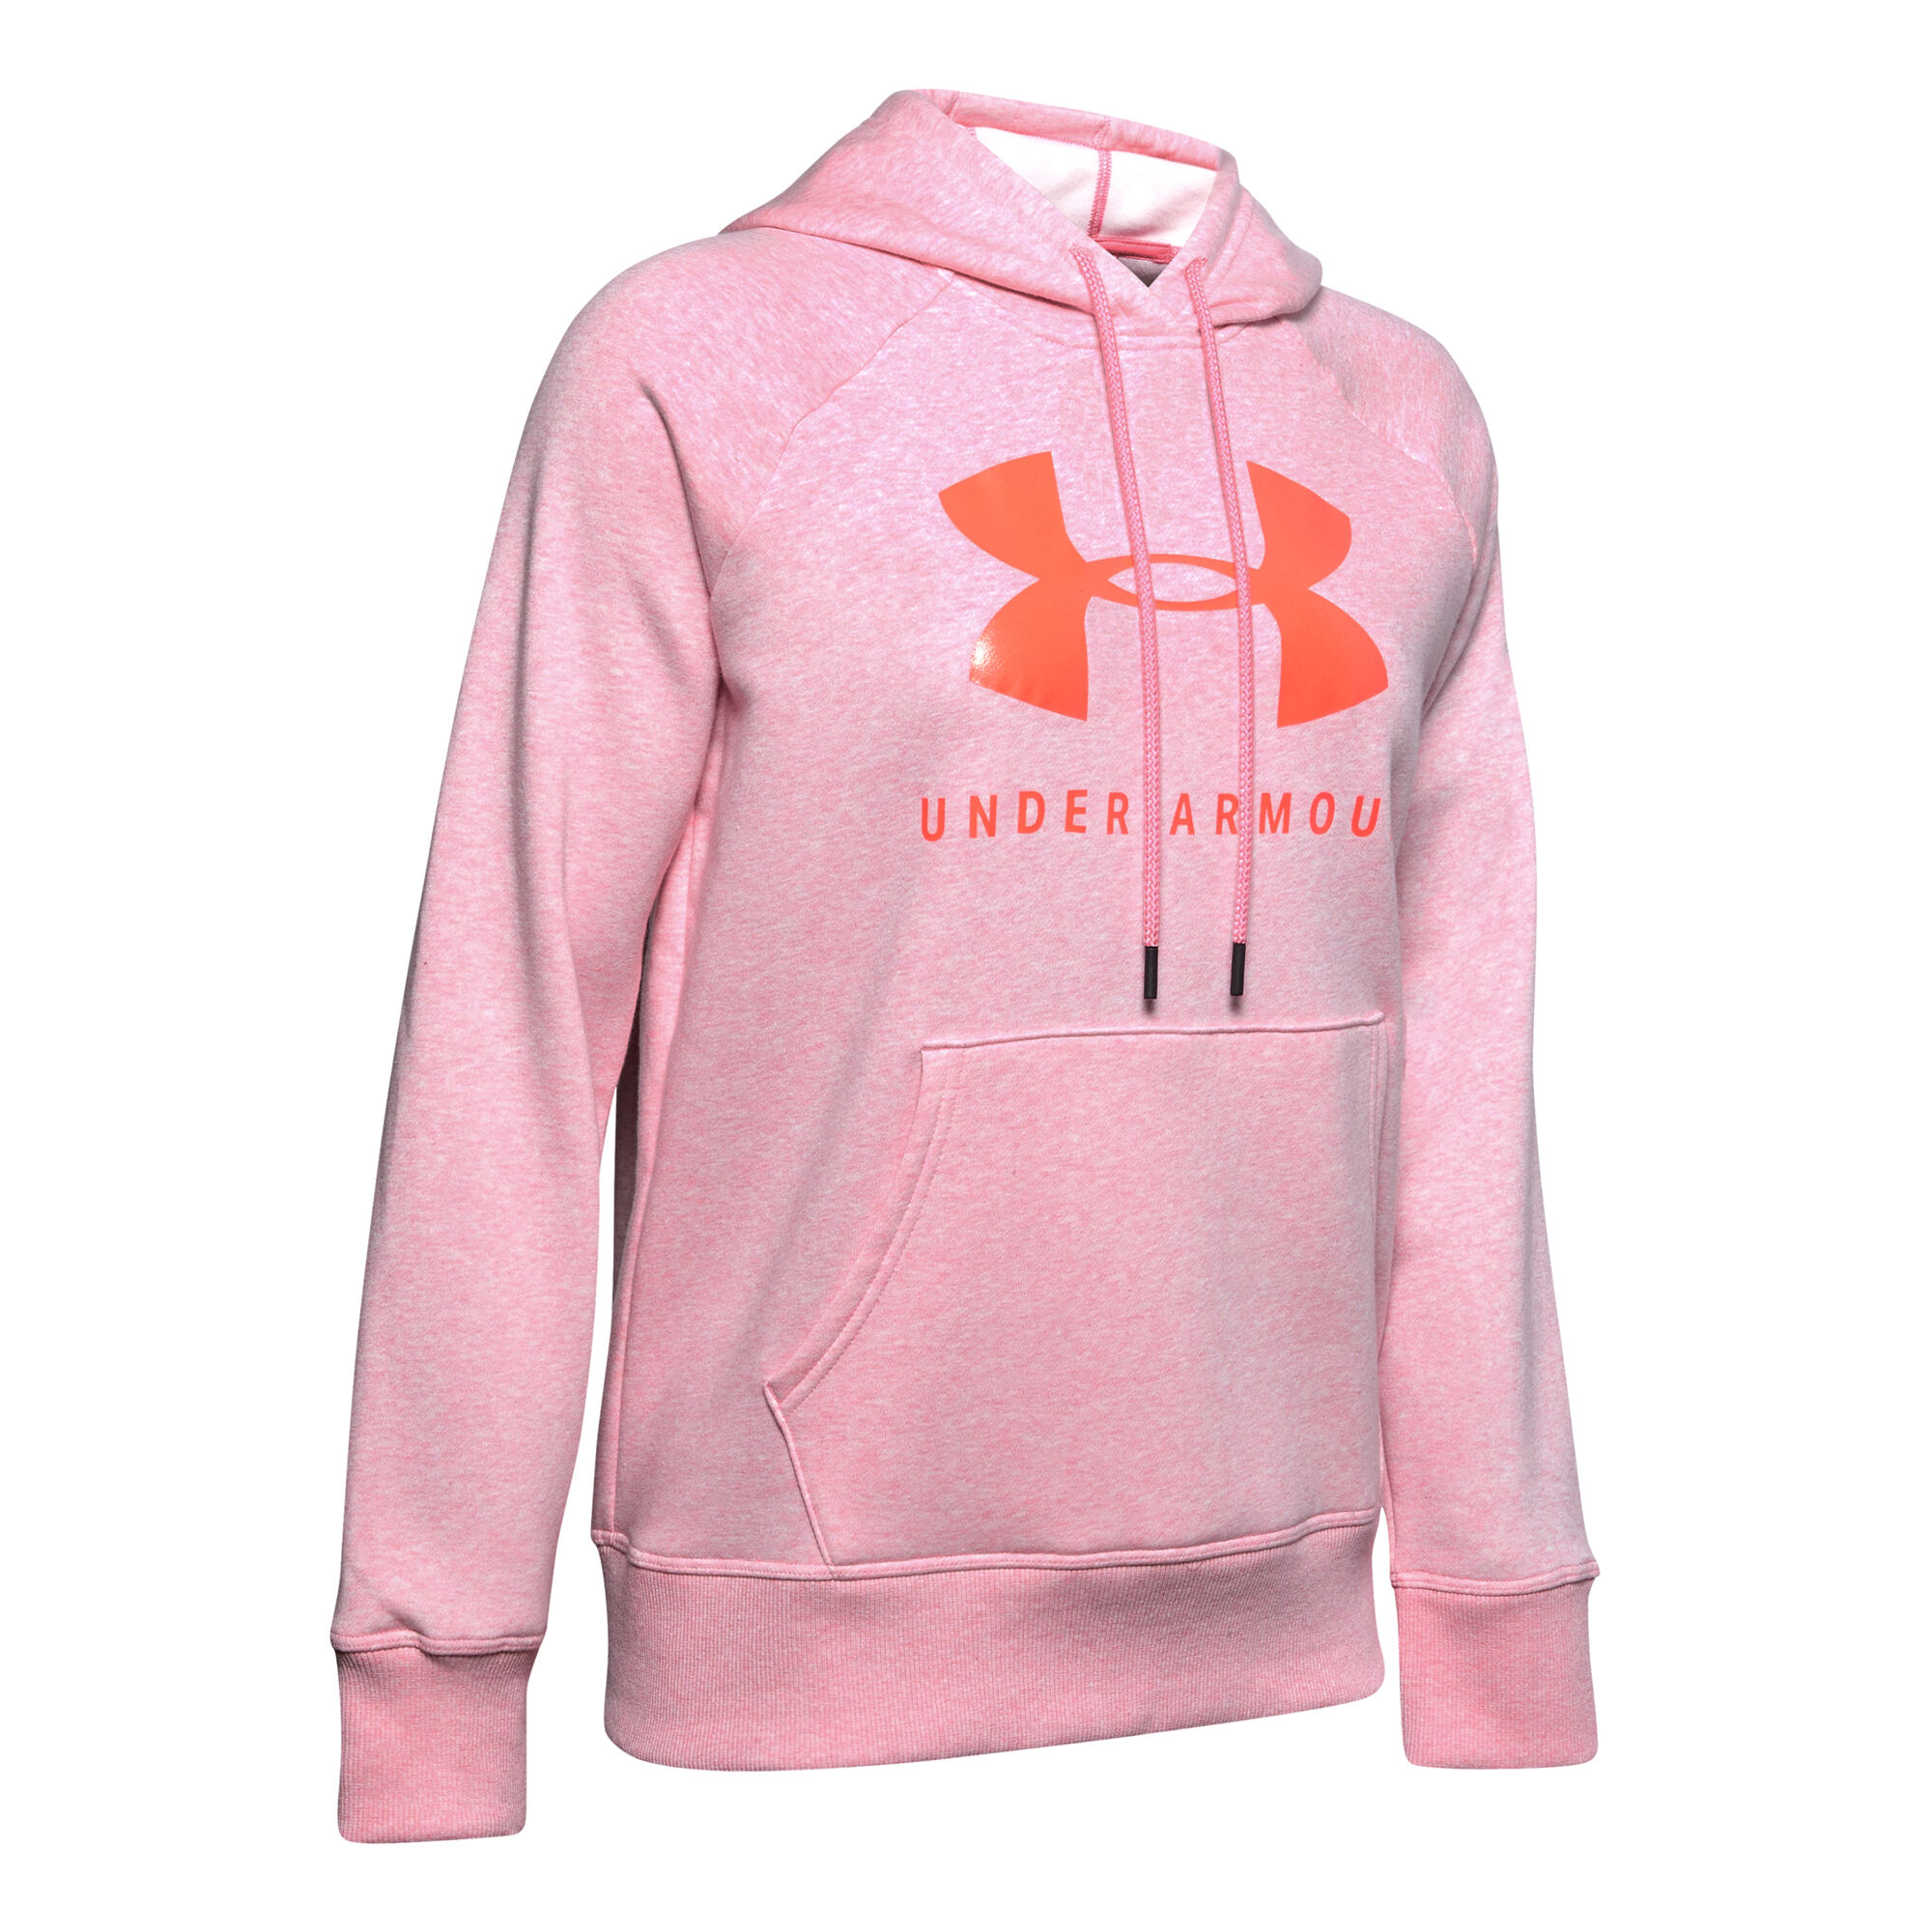 Armour Rival Sportstyle Graphic Sudadera Con Capucha Mujeres - Rosa, Naranja online | Tennis-Point